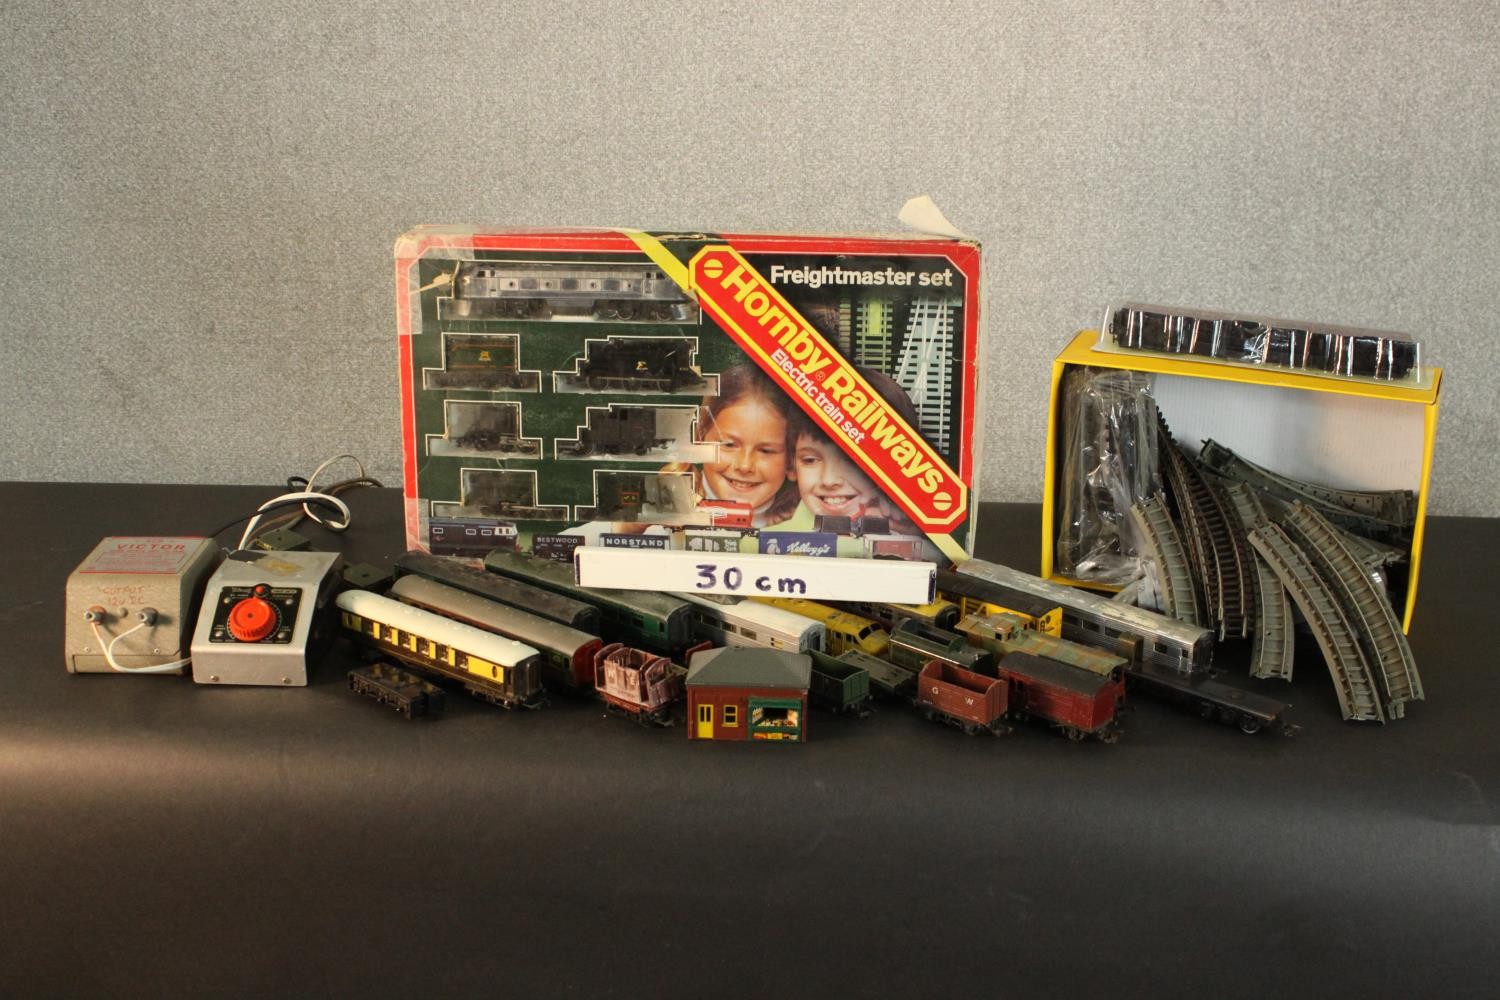 A Hornby Railways Freight Master train set, a Triang electric control box and other vintage - Image 2 of 11